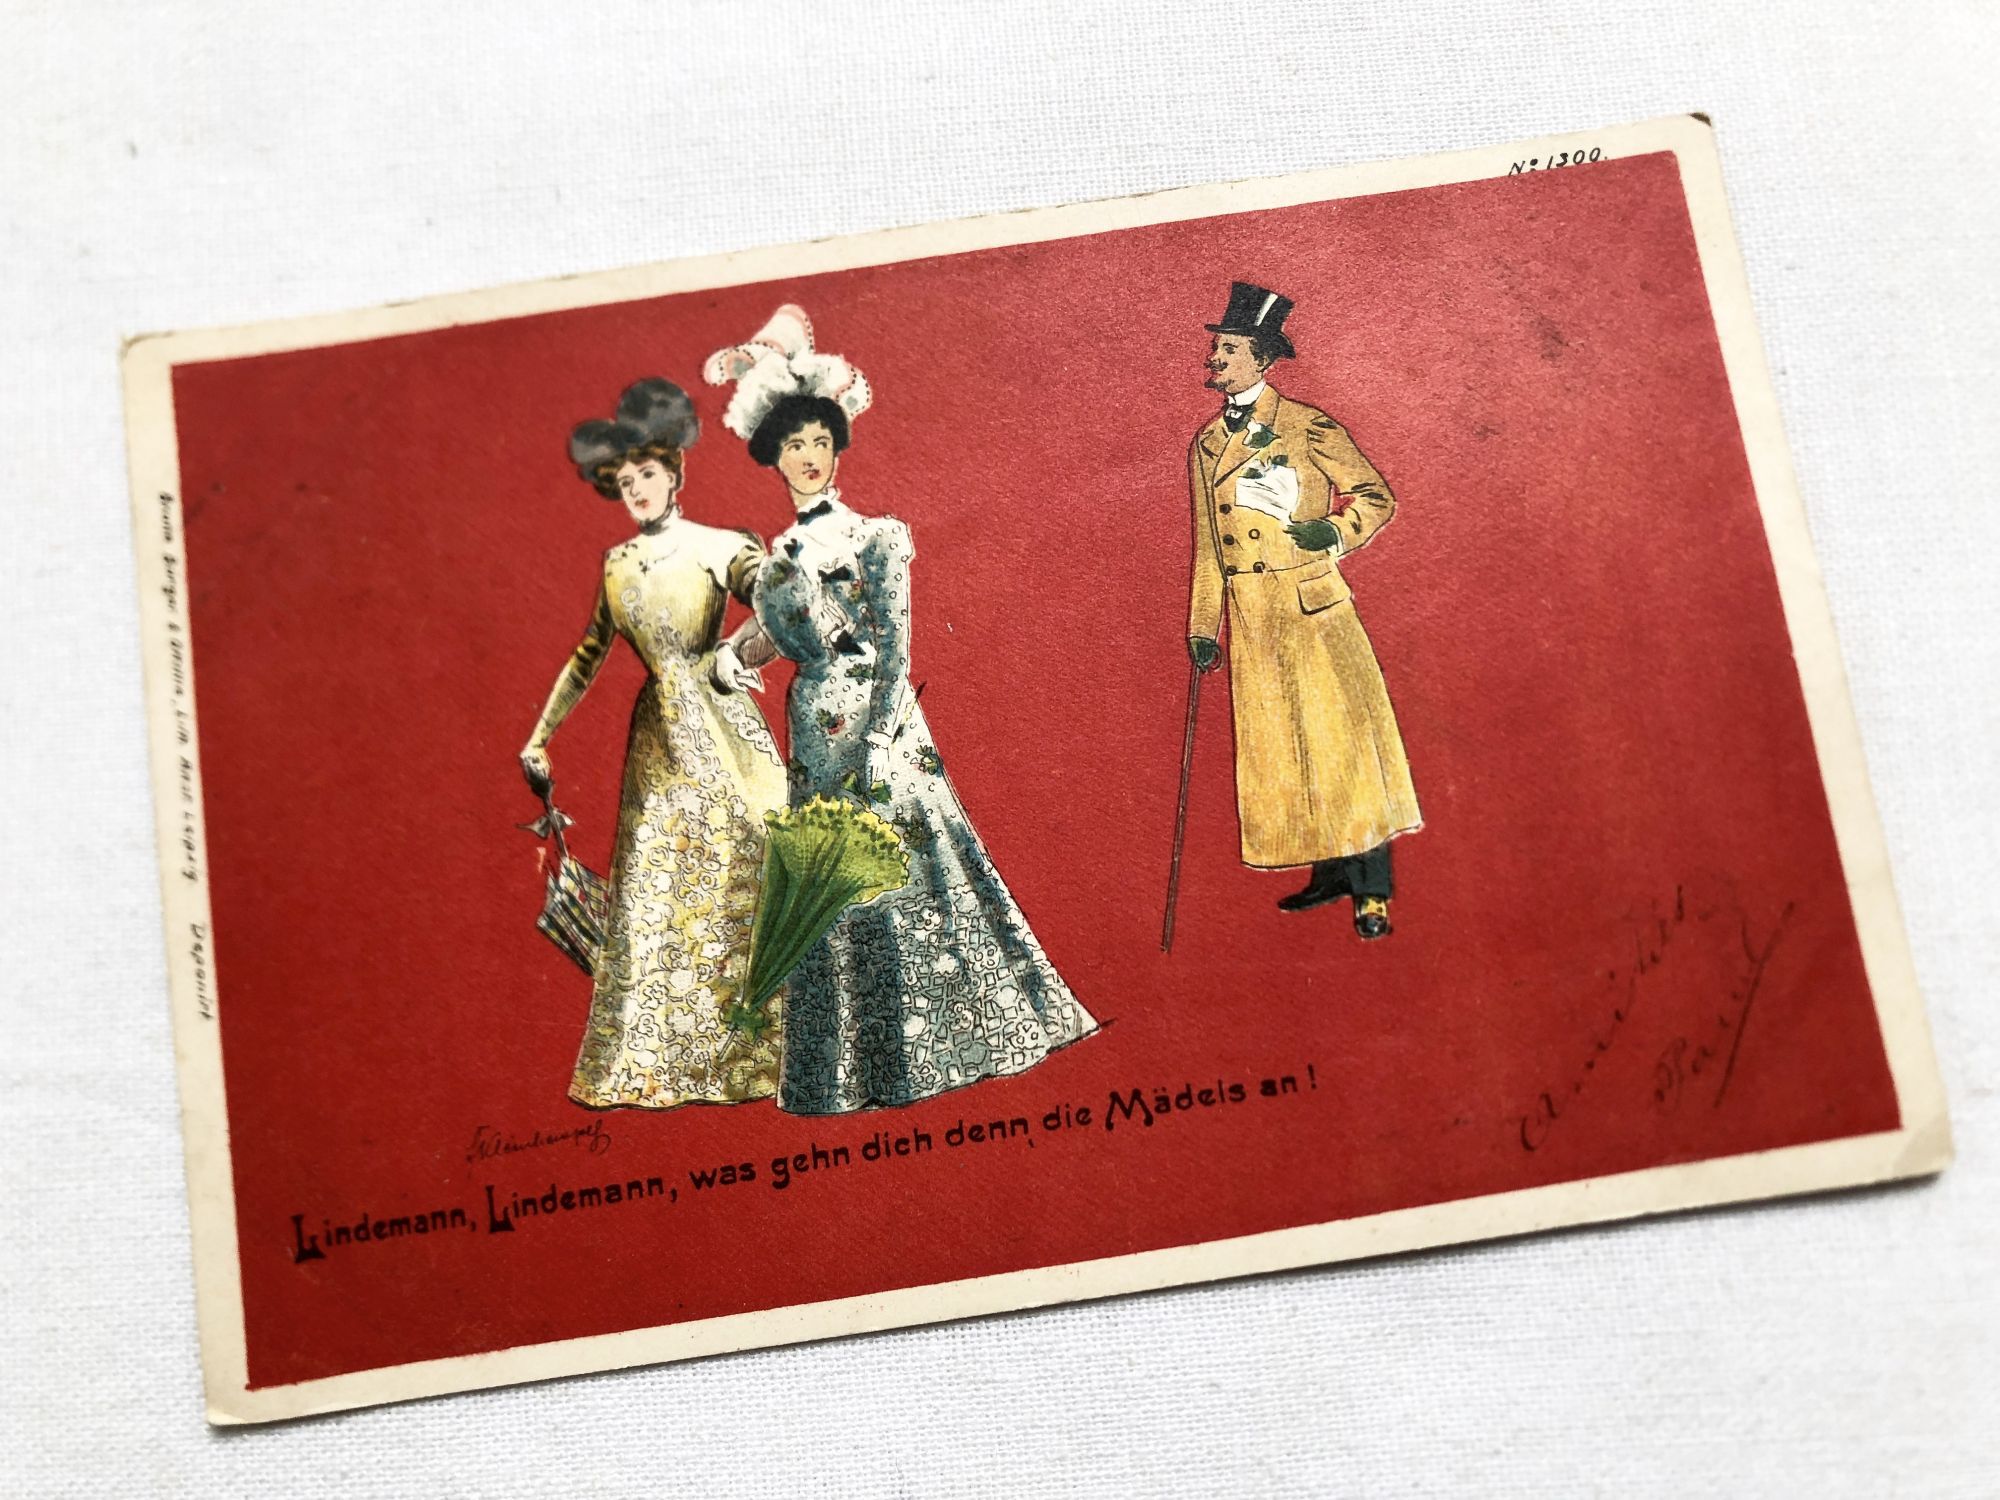 Vintage German postcard with two ladies  and a gentleman from 1900s